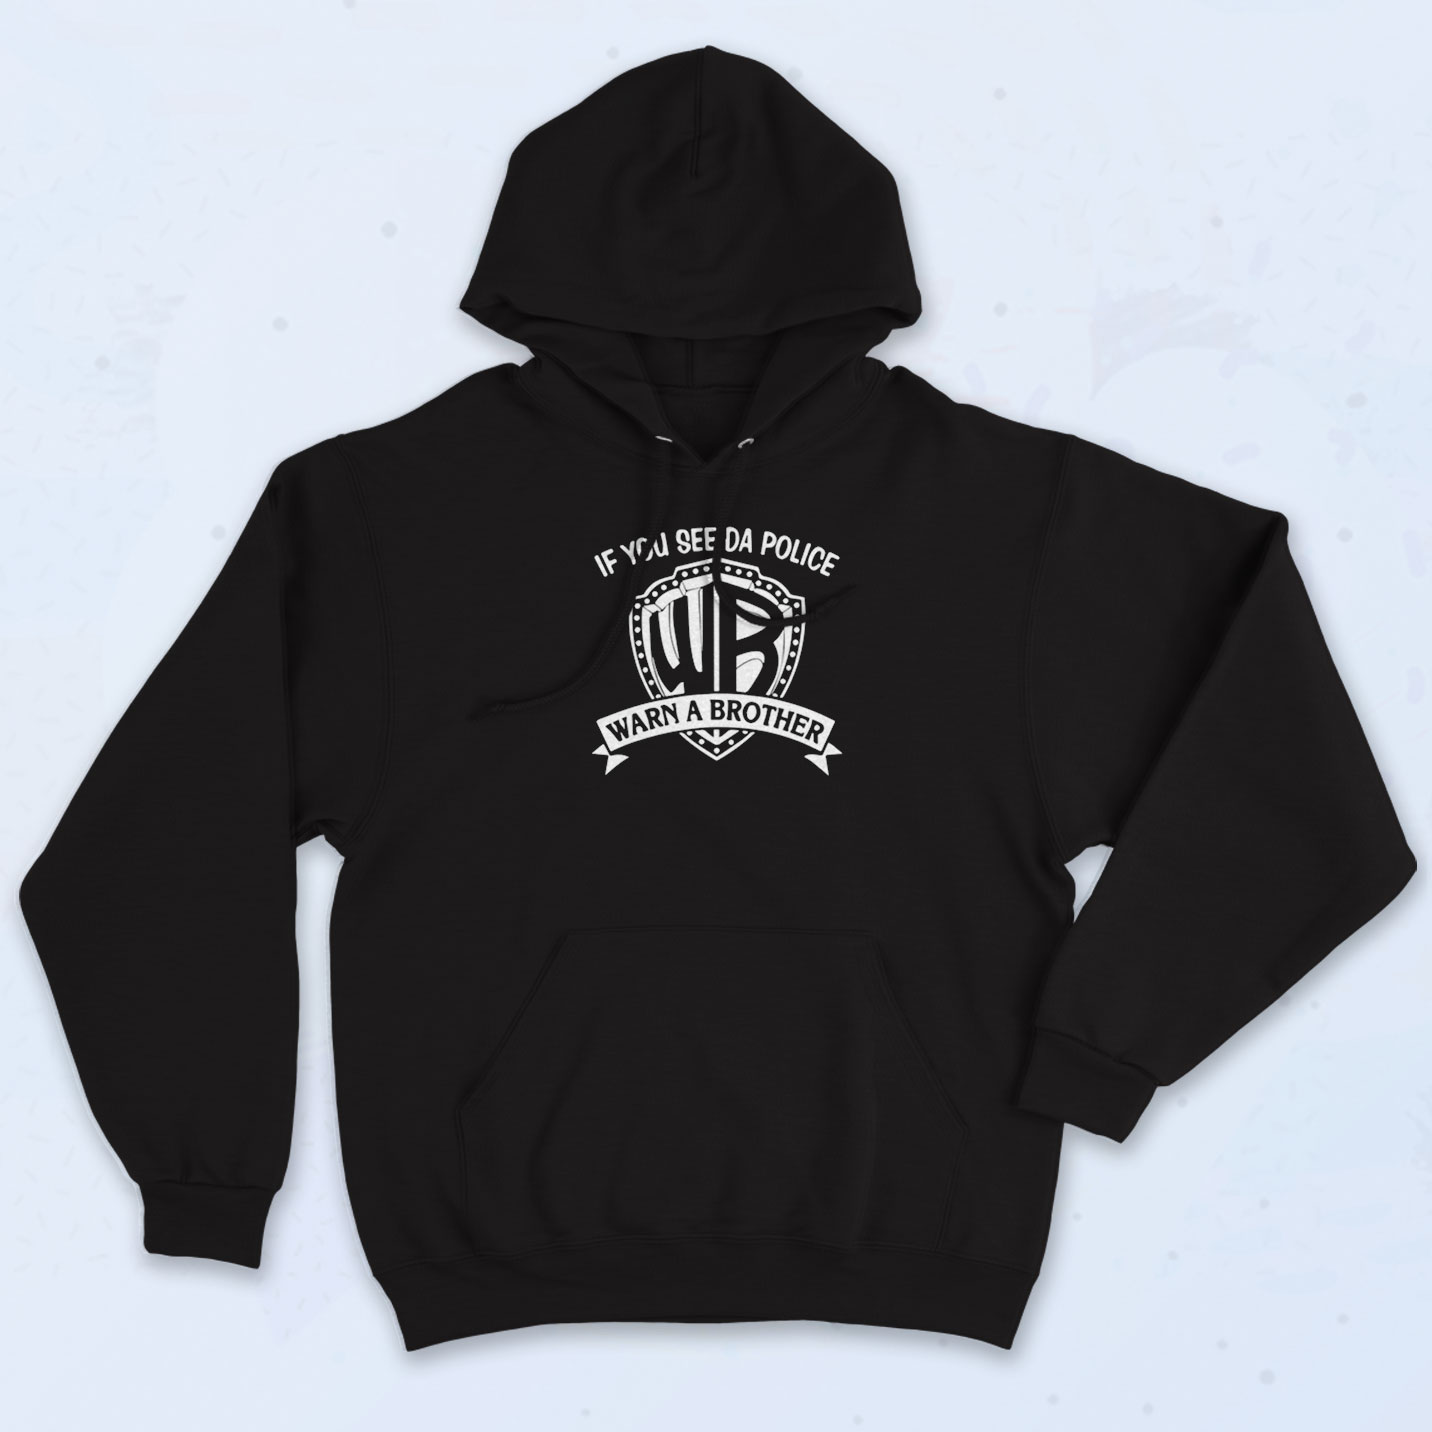 If You See Da Police Warn A Brother 90s Style Hoodie - 90sclothes.com